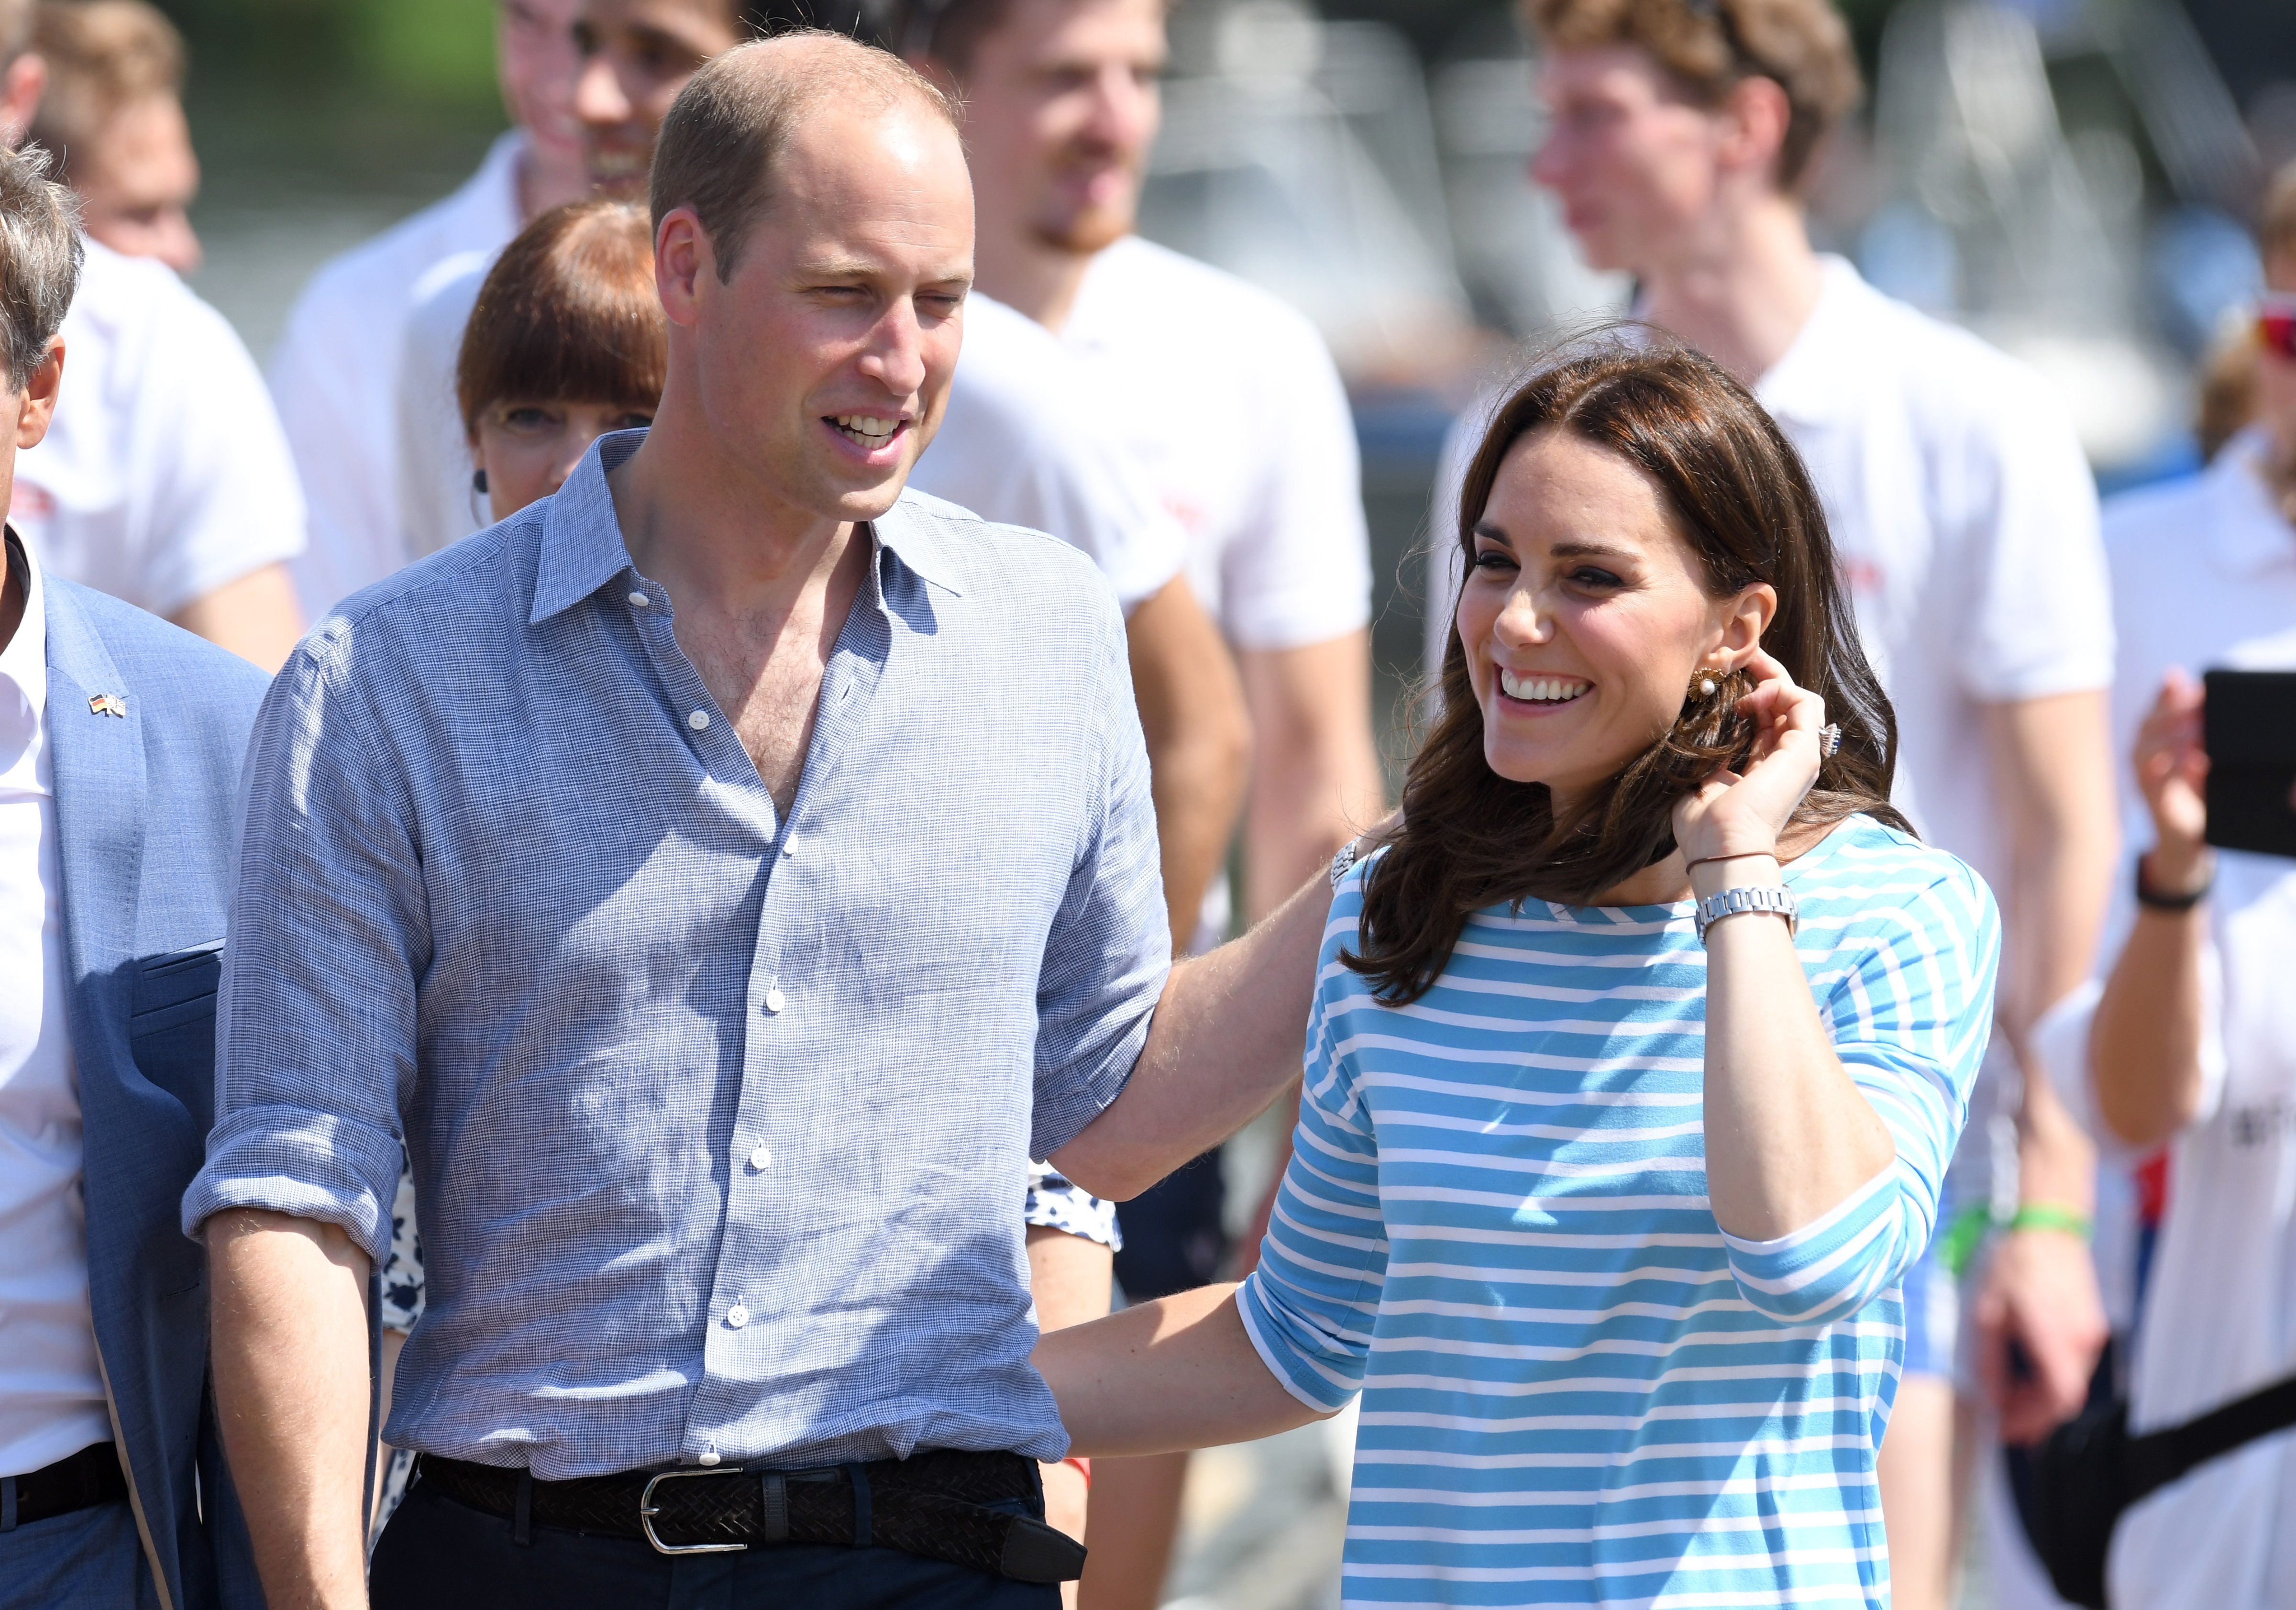 Prince William, Duke of Cambridge and Catherine, Duchess of Cambridge after participating in a rowing race between the twinned town of Cambridge and Heidelberg on day 2 of their official visit to Germany on July 20, 2017 in Heidelberg, Germany. (Karwai Tang—WireImage/Getty Images)